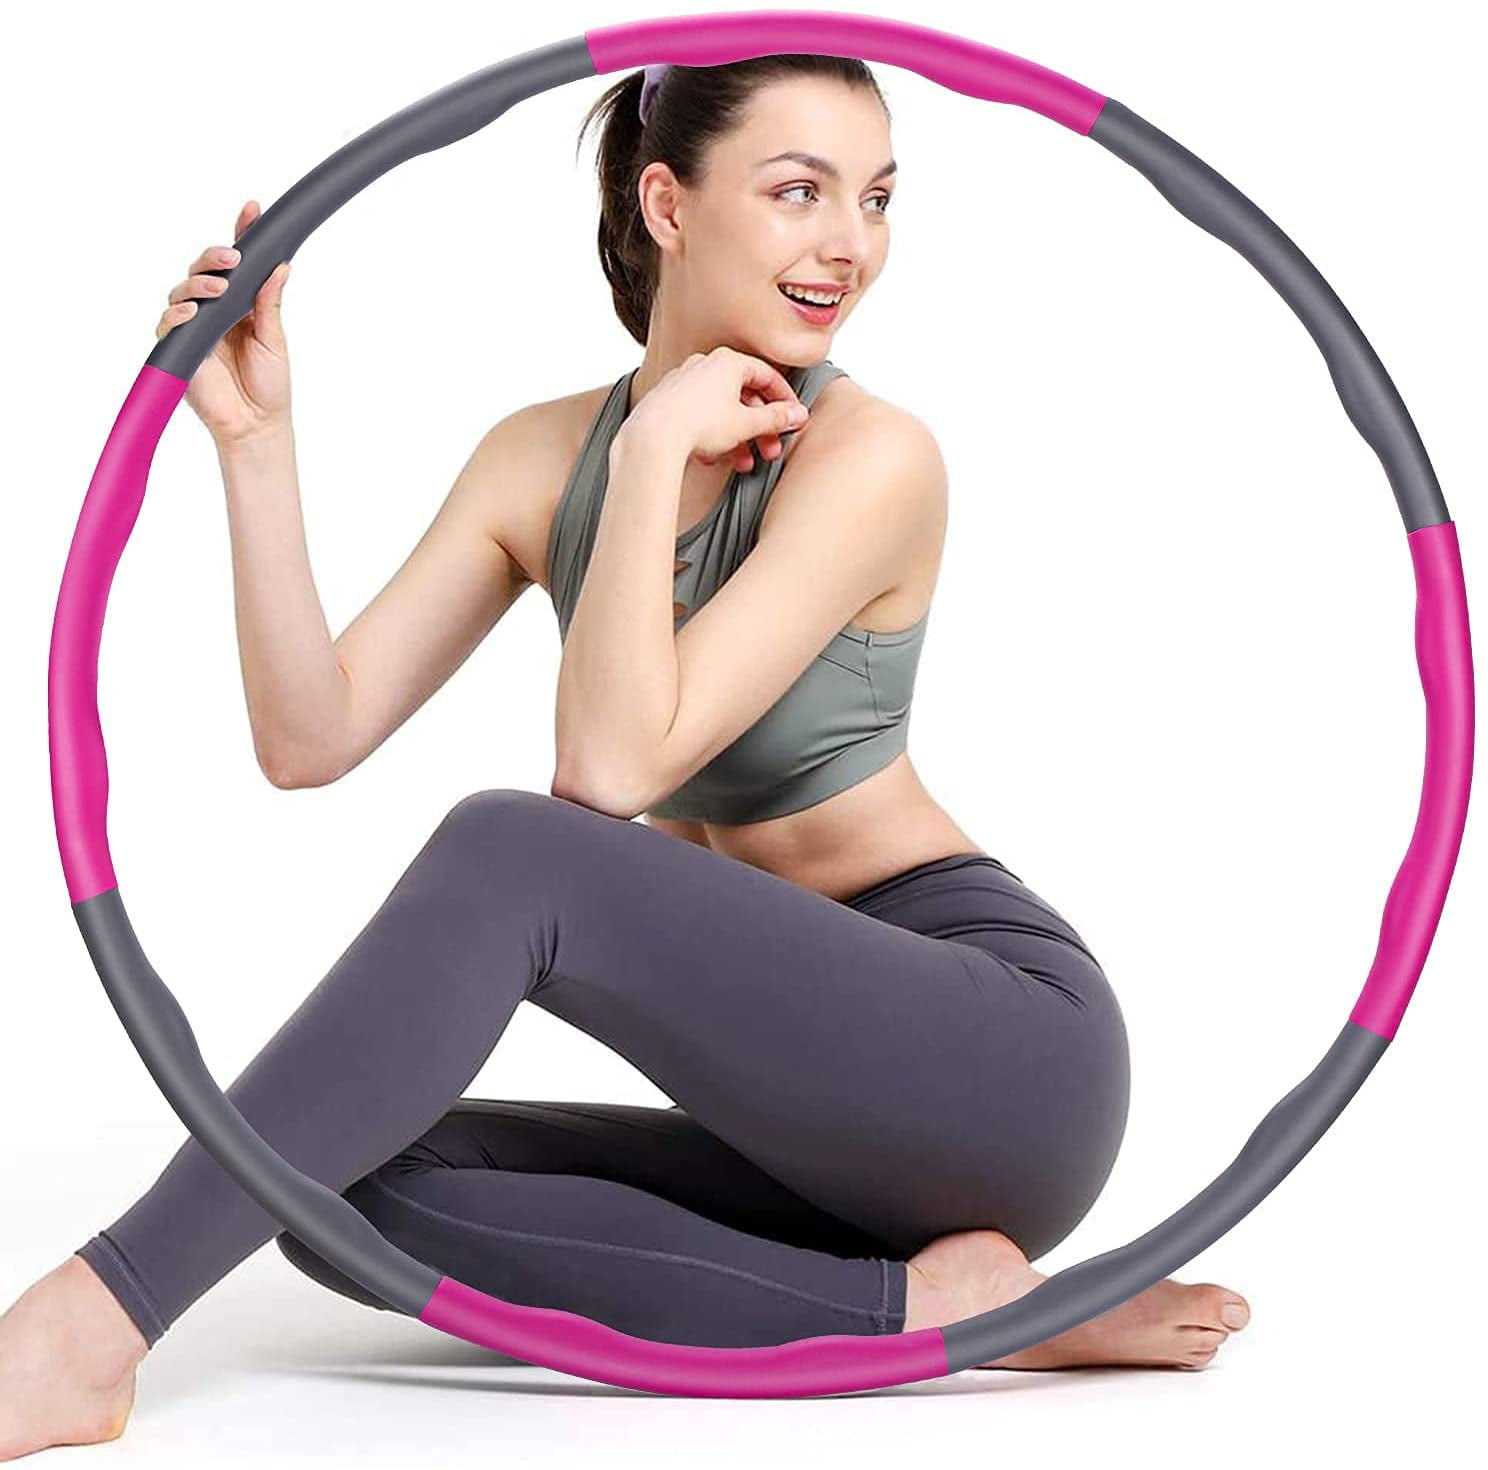 Hula Hoop Fitness Exercise ABS Workout Gym Activity Adult Kids Plastic Hoola New 